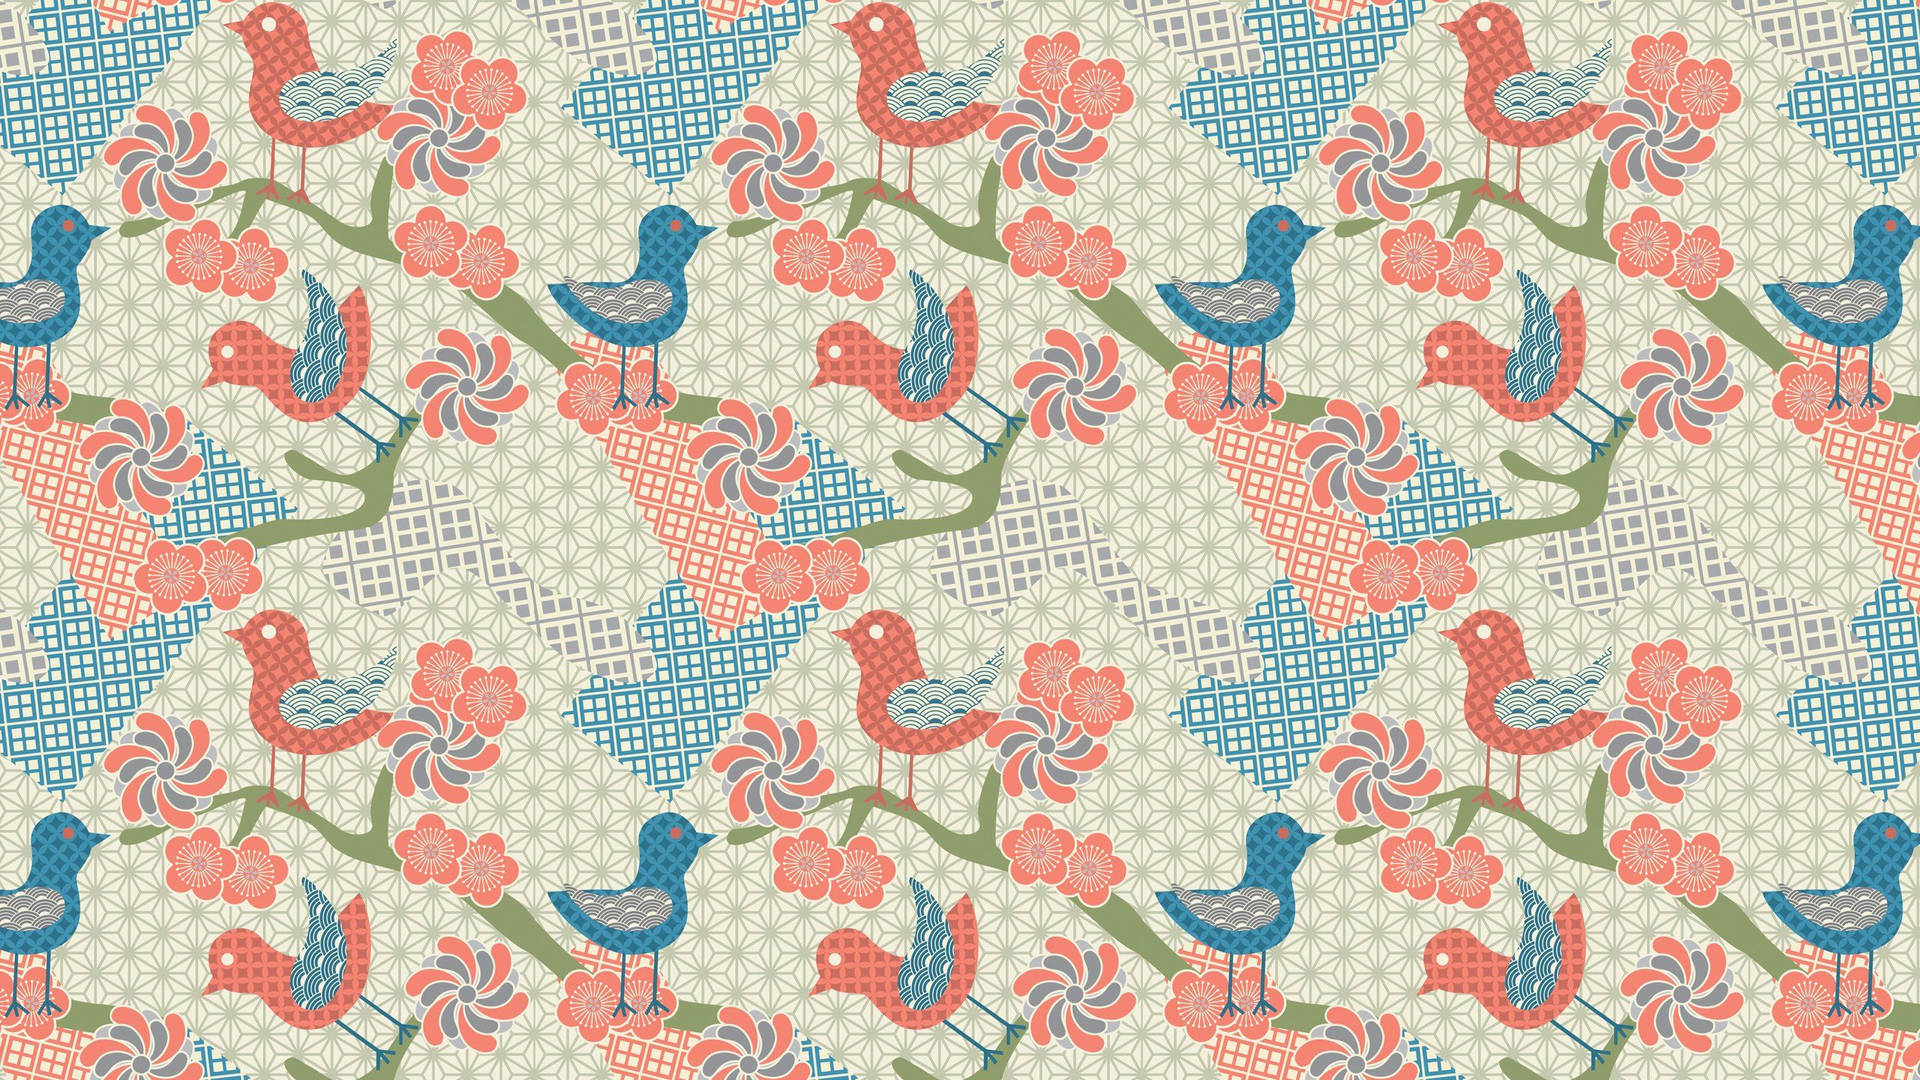 Bird Illustration With Different Color Pattern